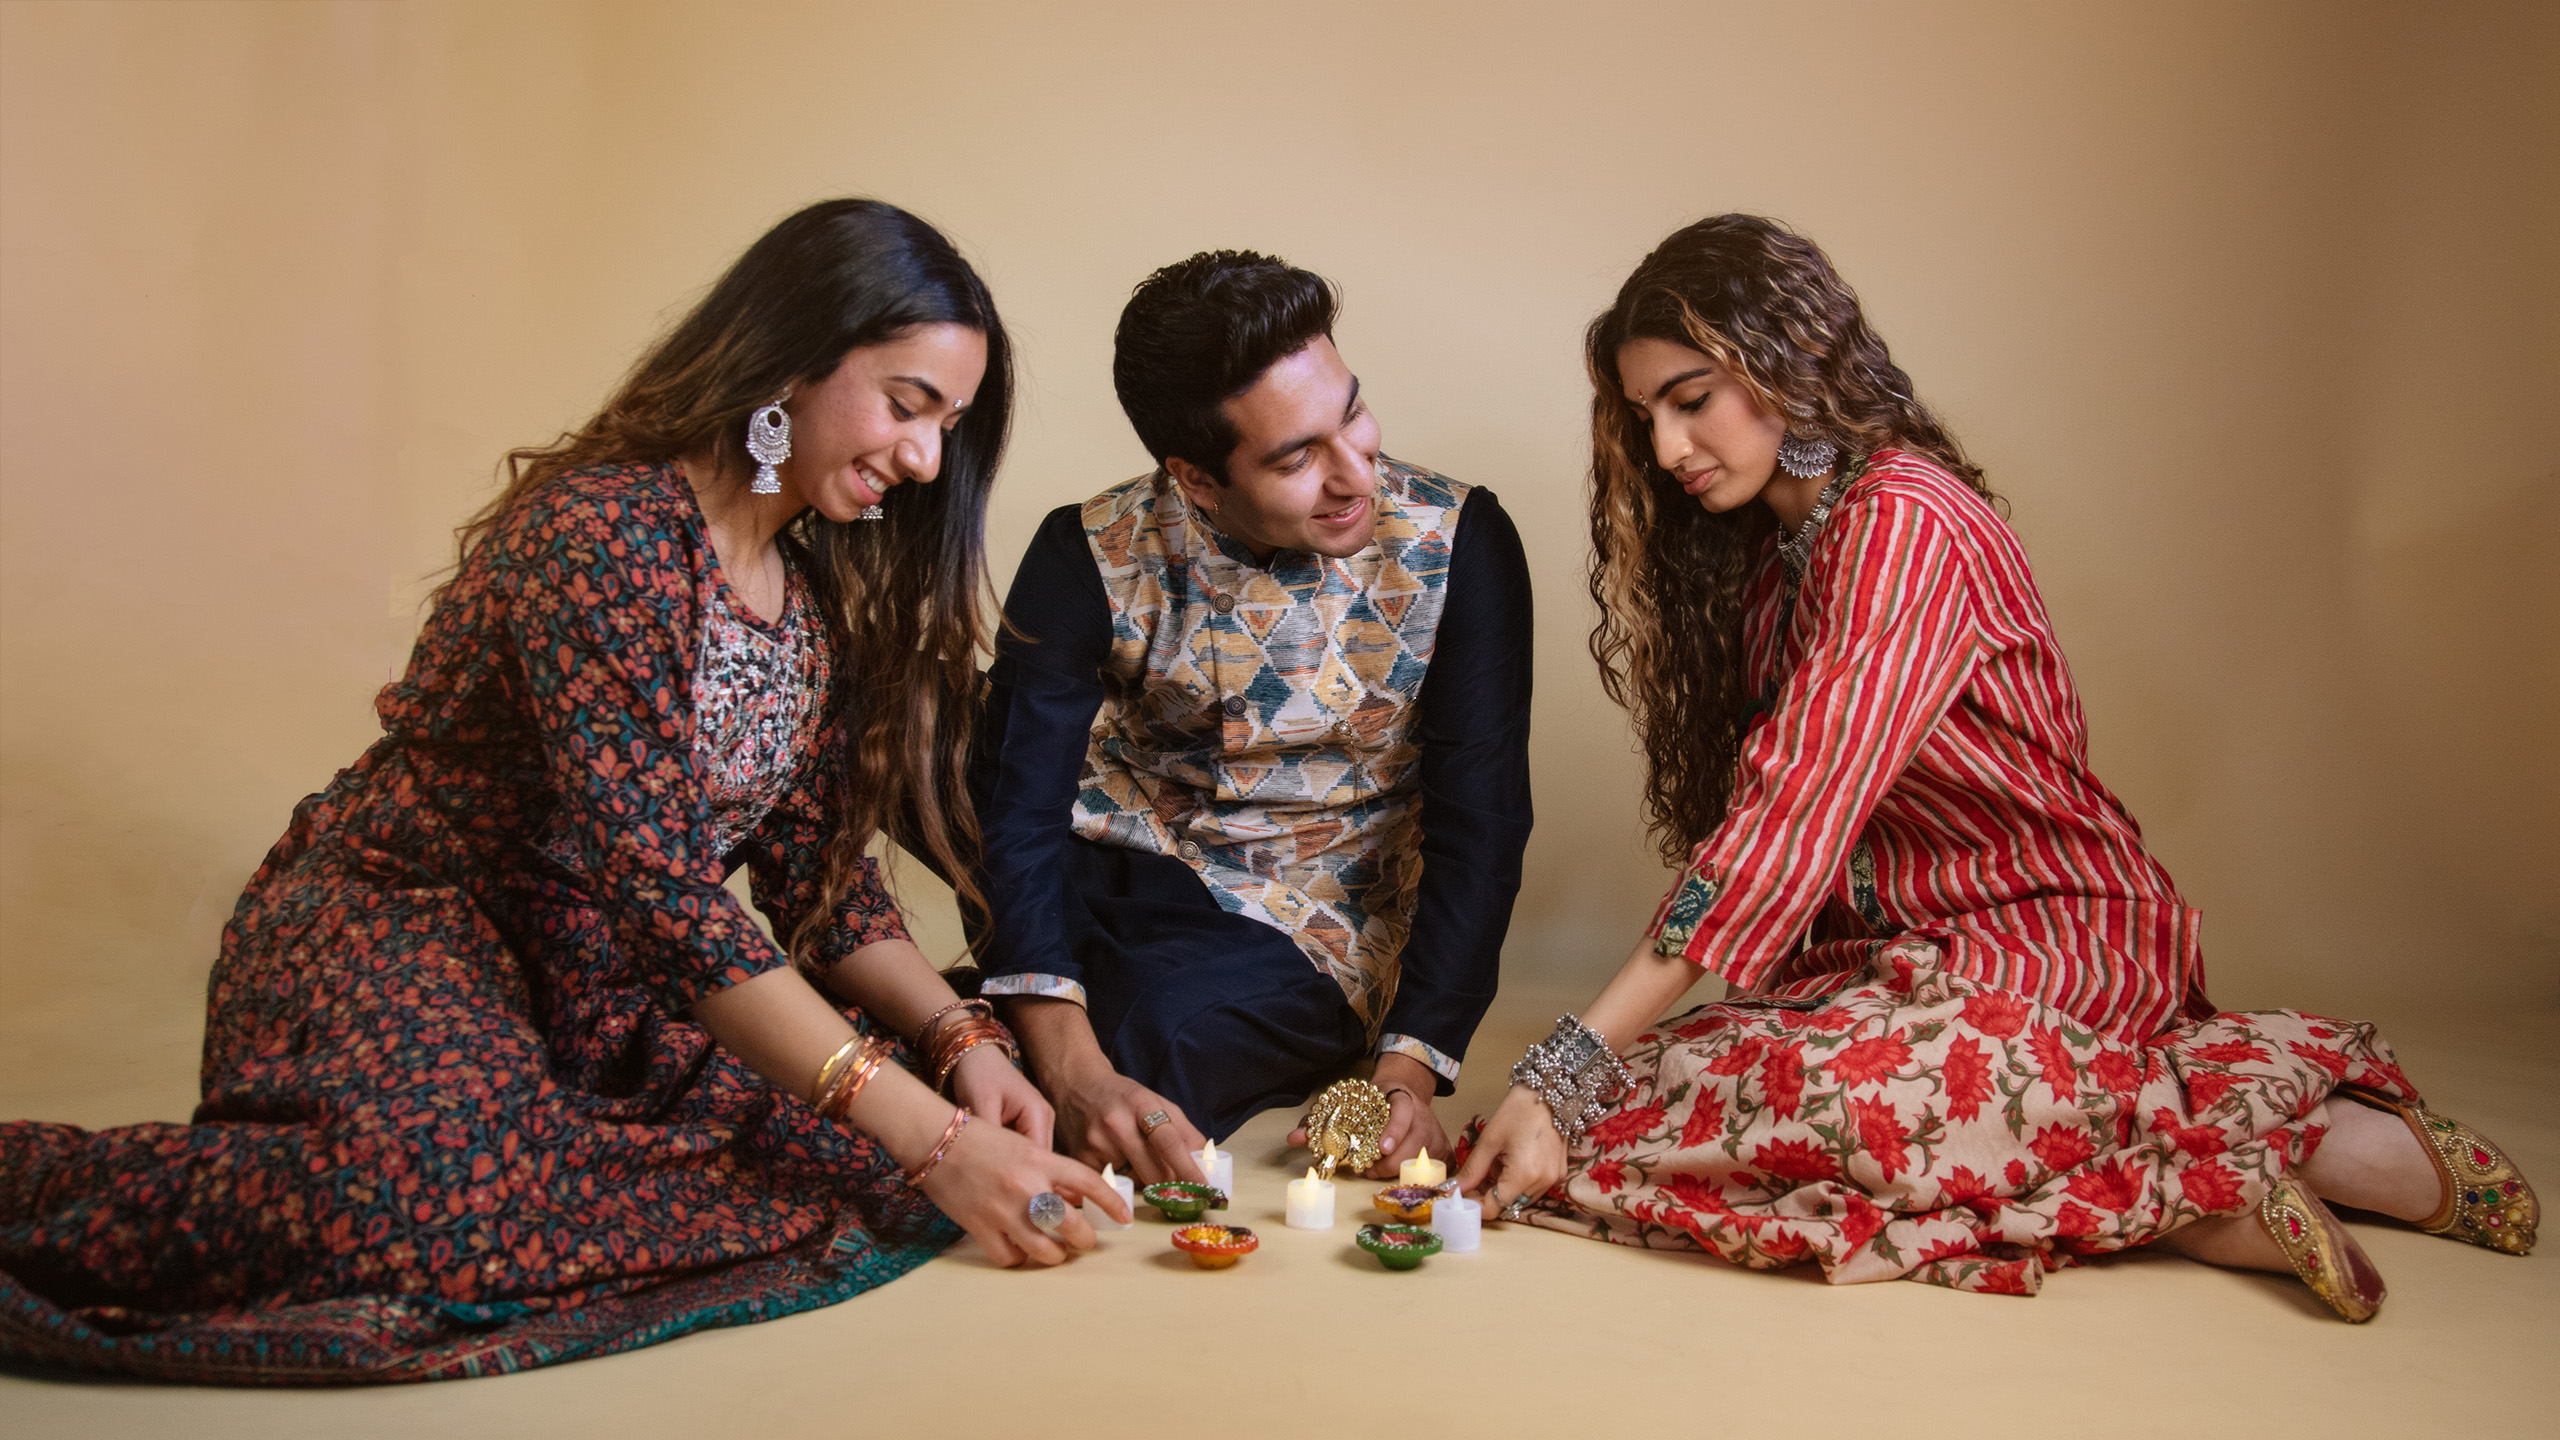 Three people arranging diyas and smiling at each other